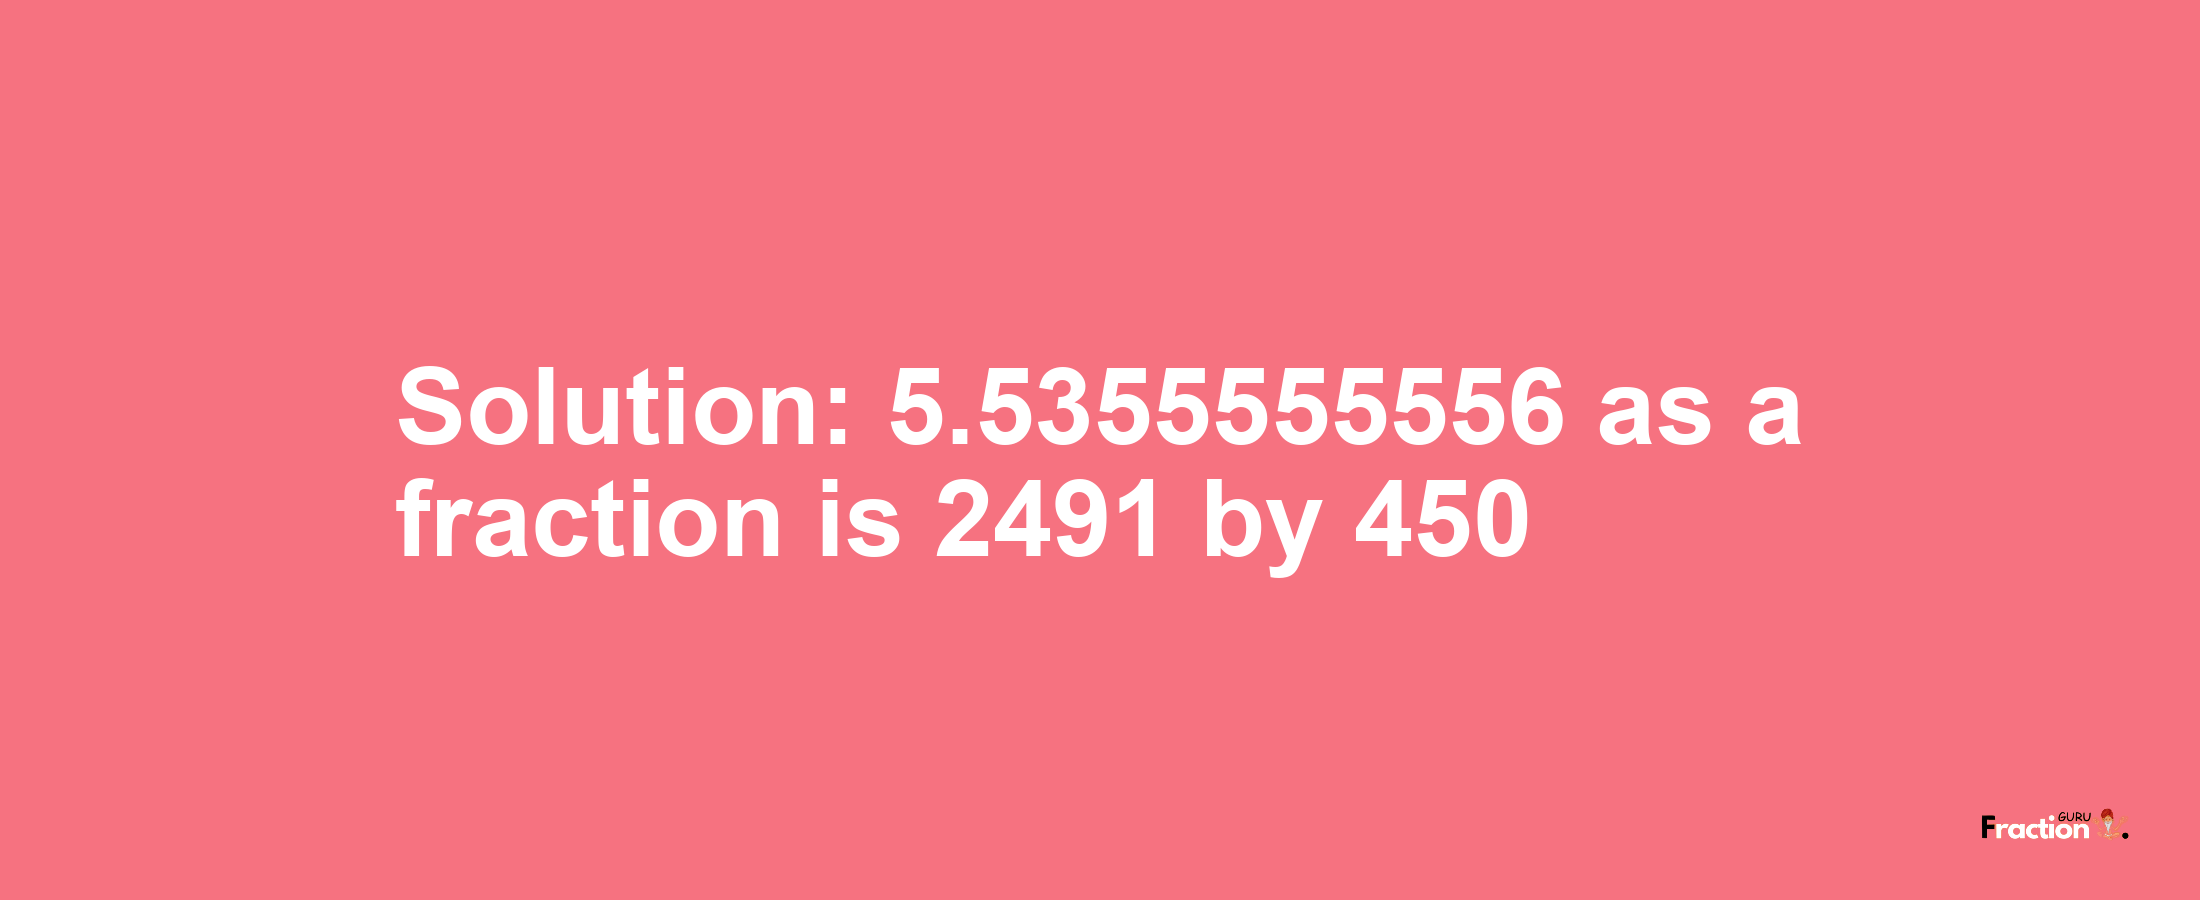 Solution:5.5355555556 as a fraction is 2491/450